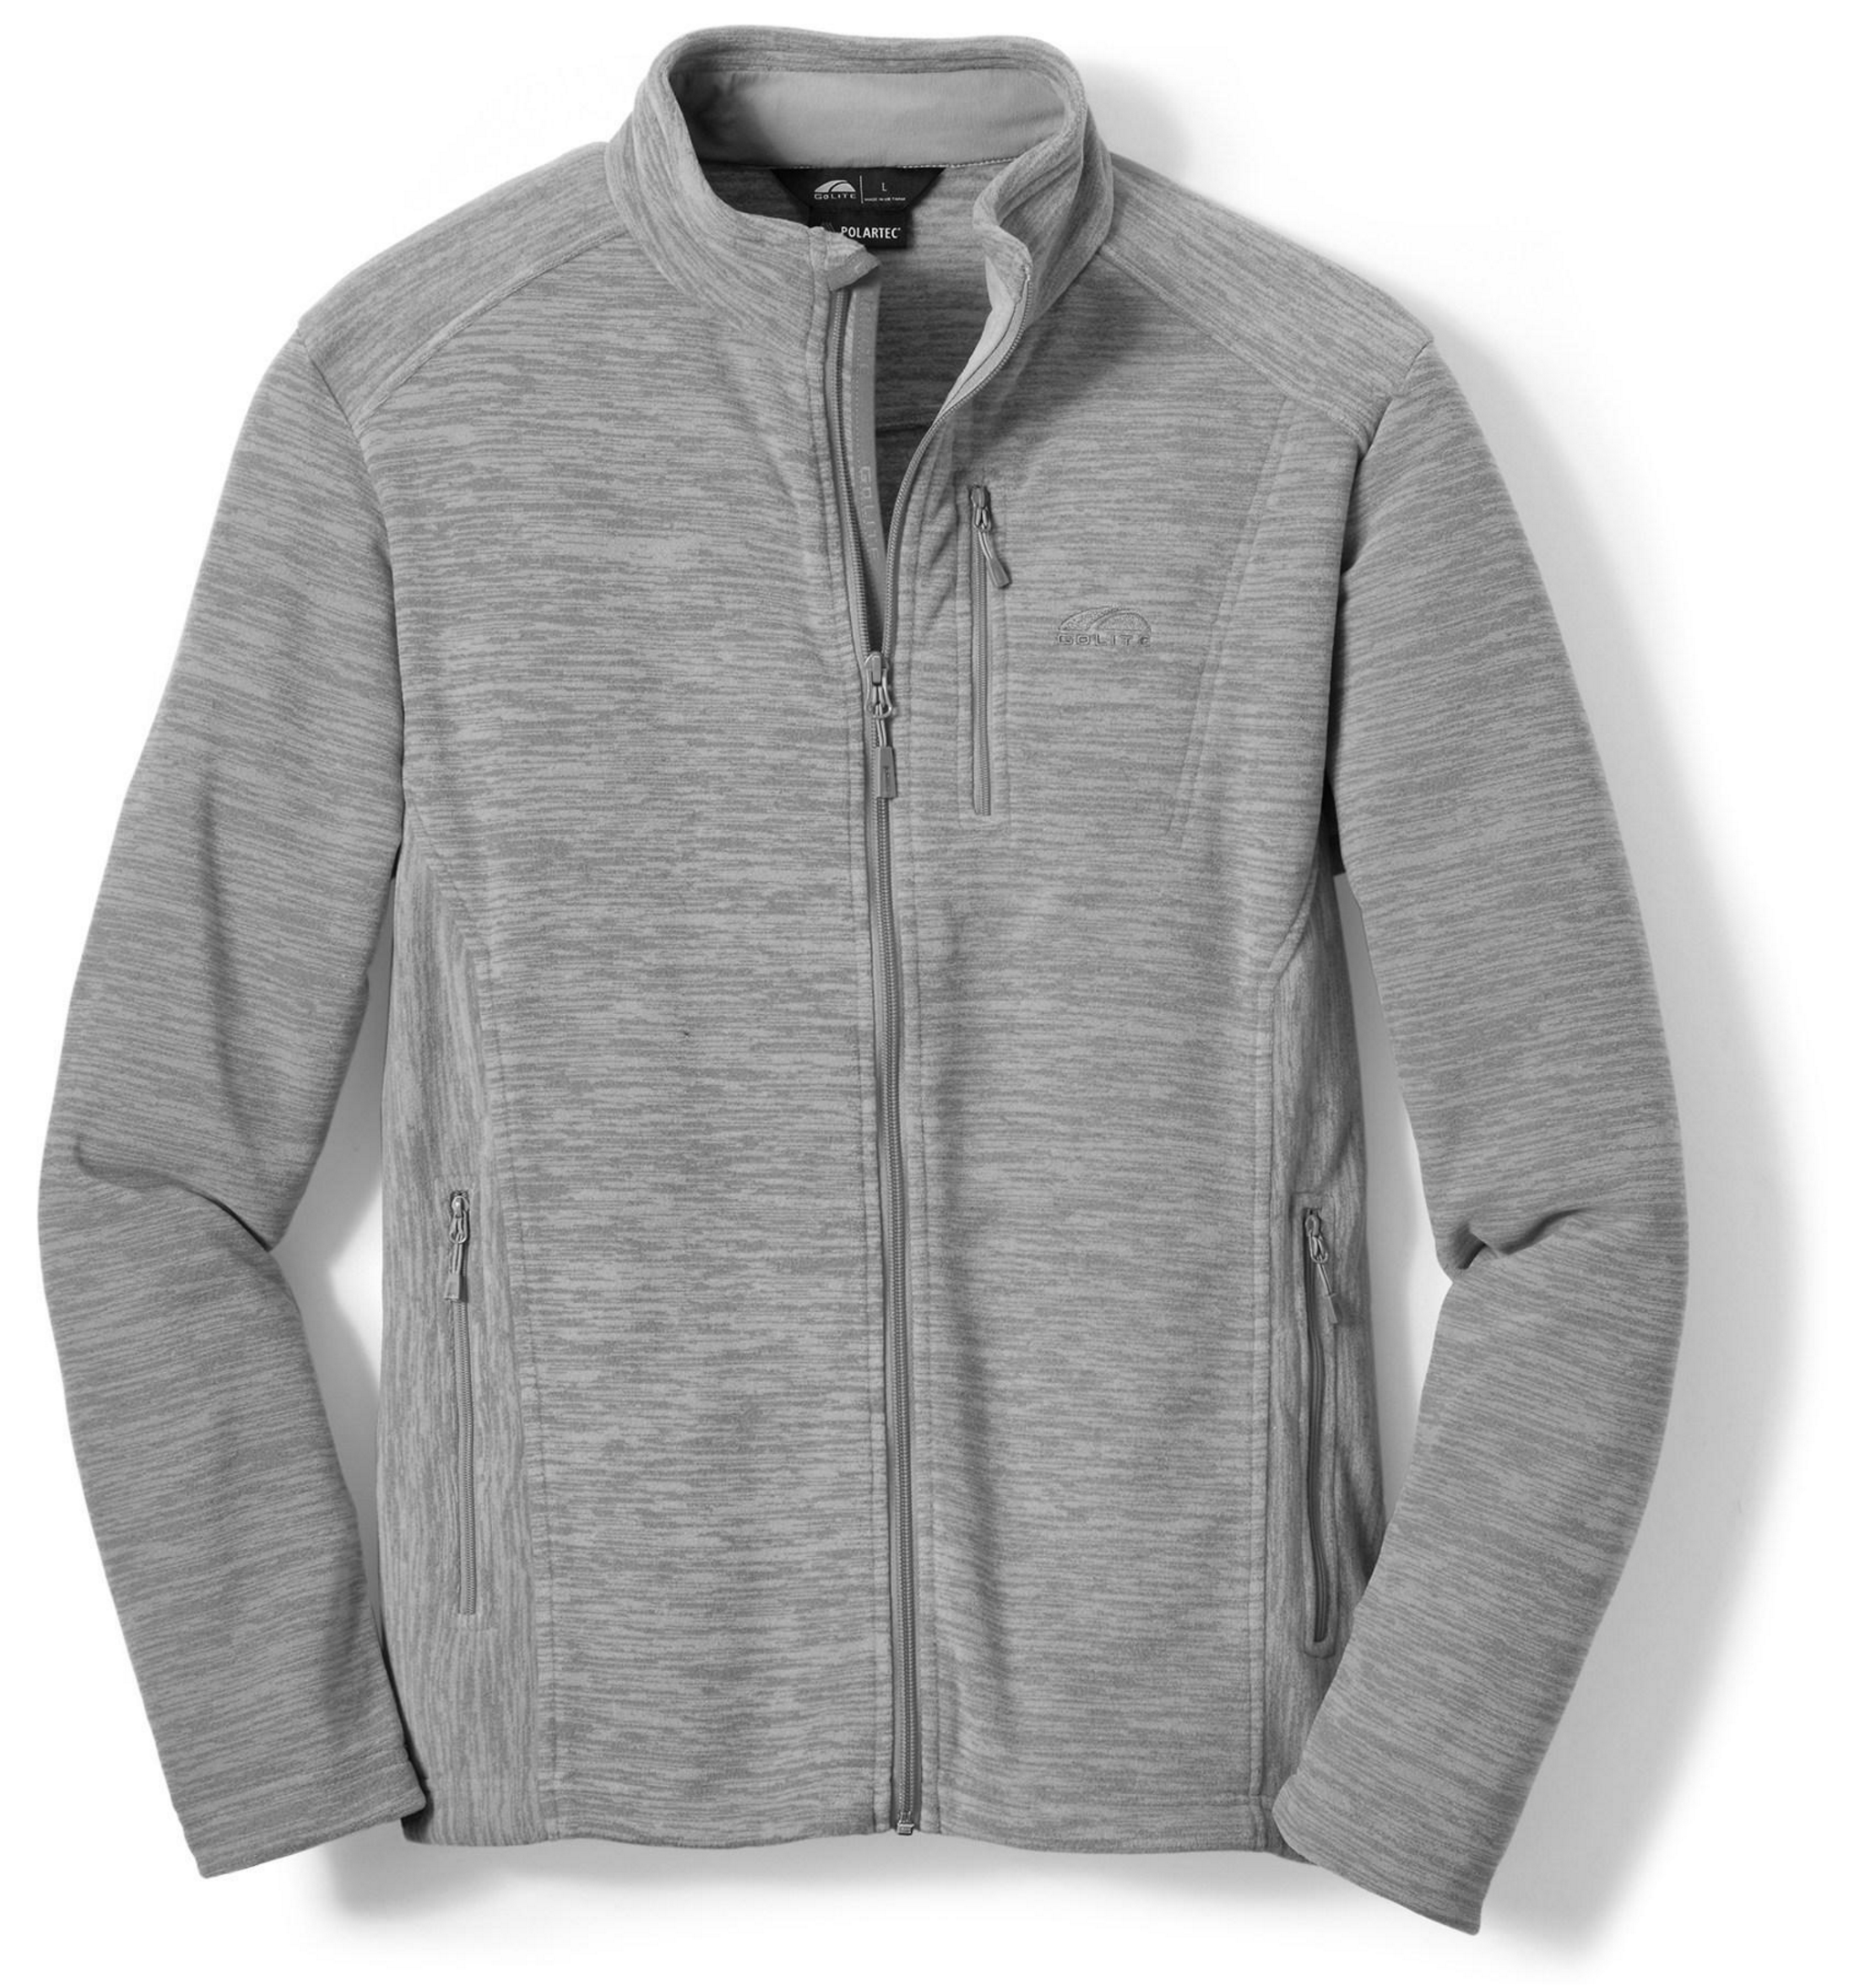 Sports/Fitness: Columbia Men's outerwear sale up to 50% off, more